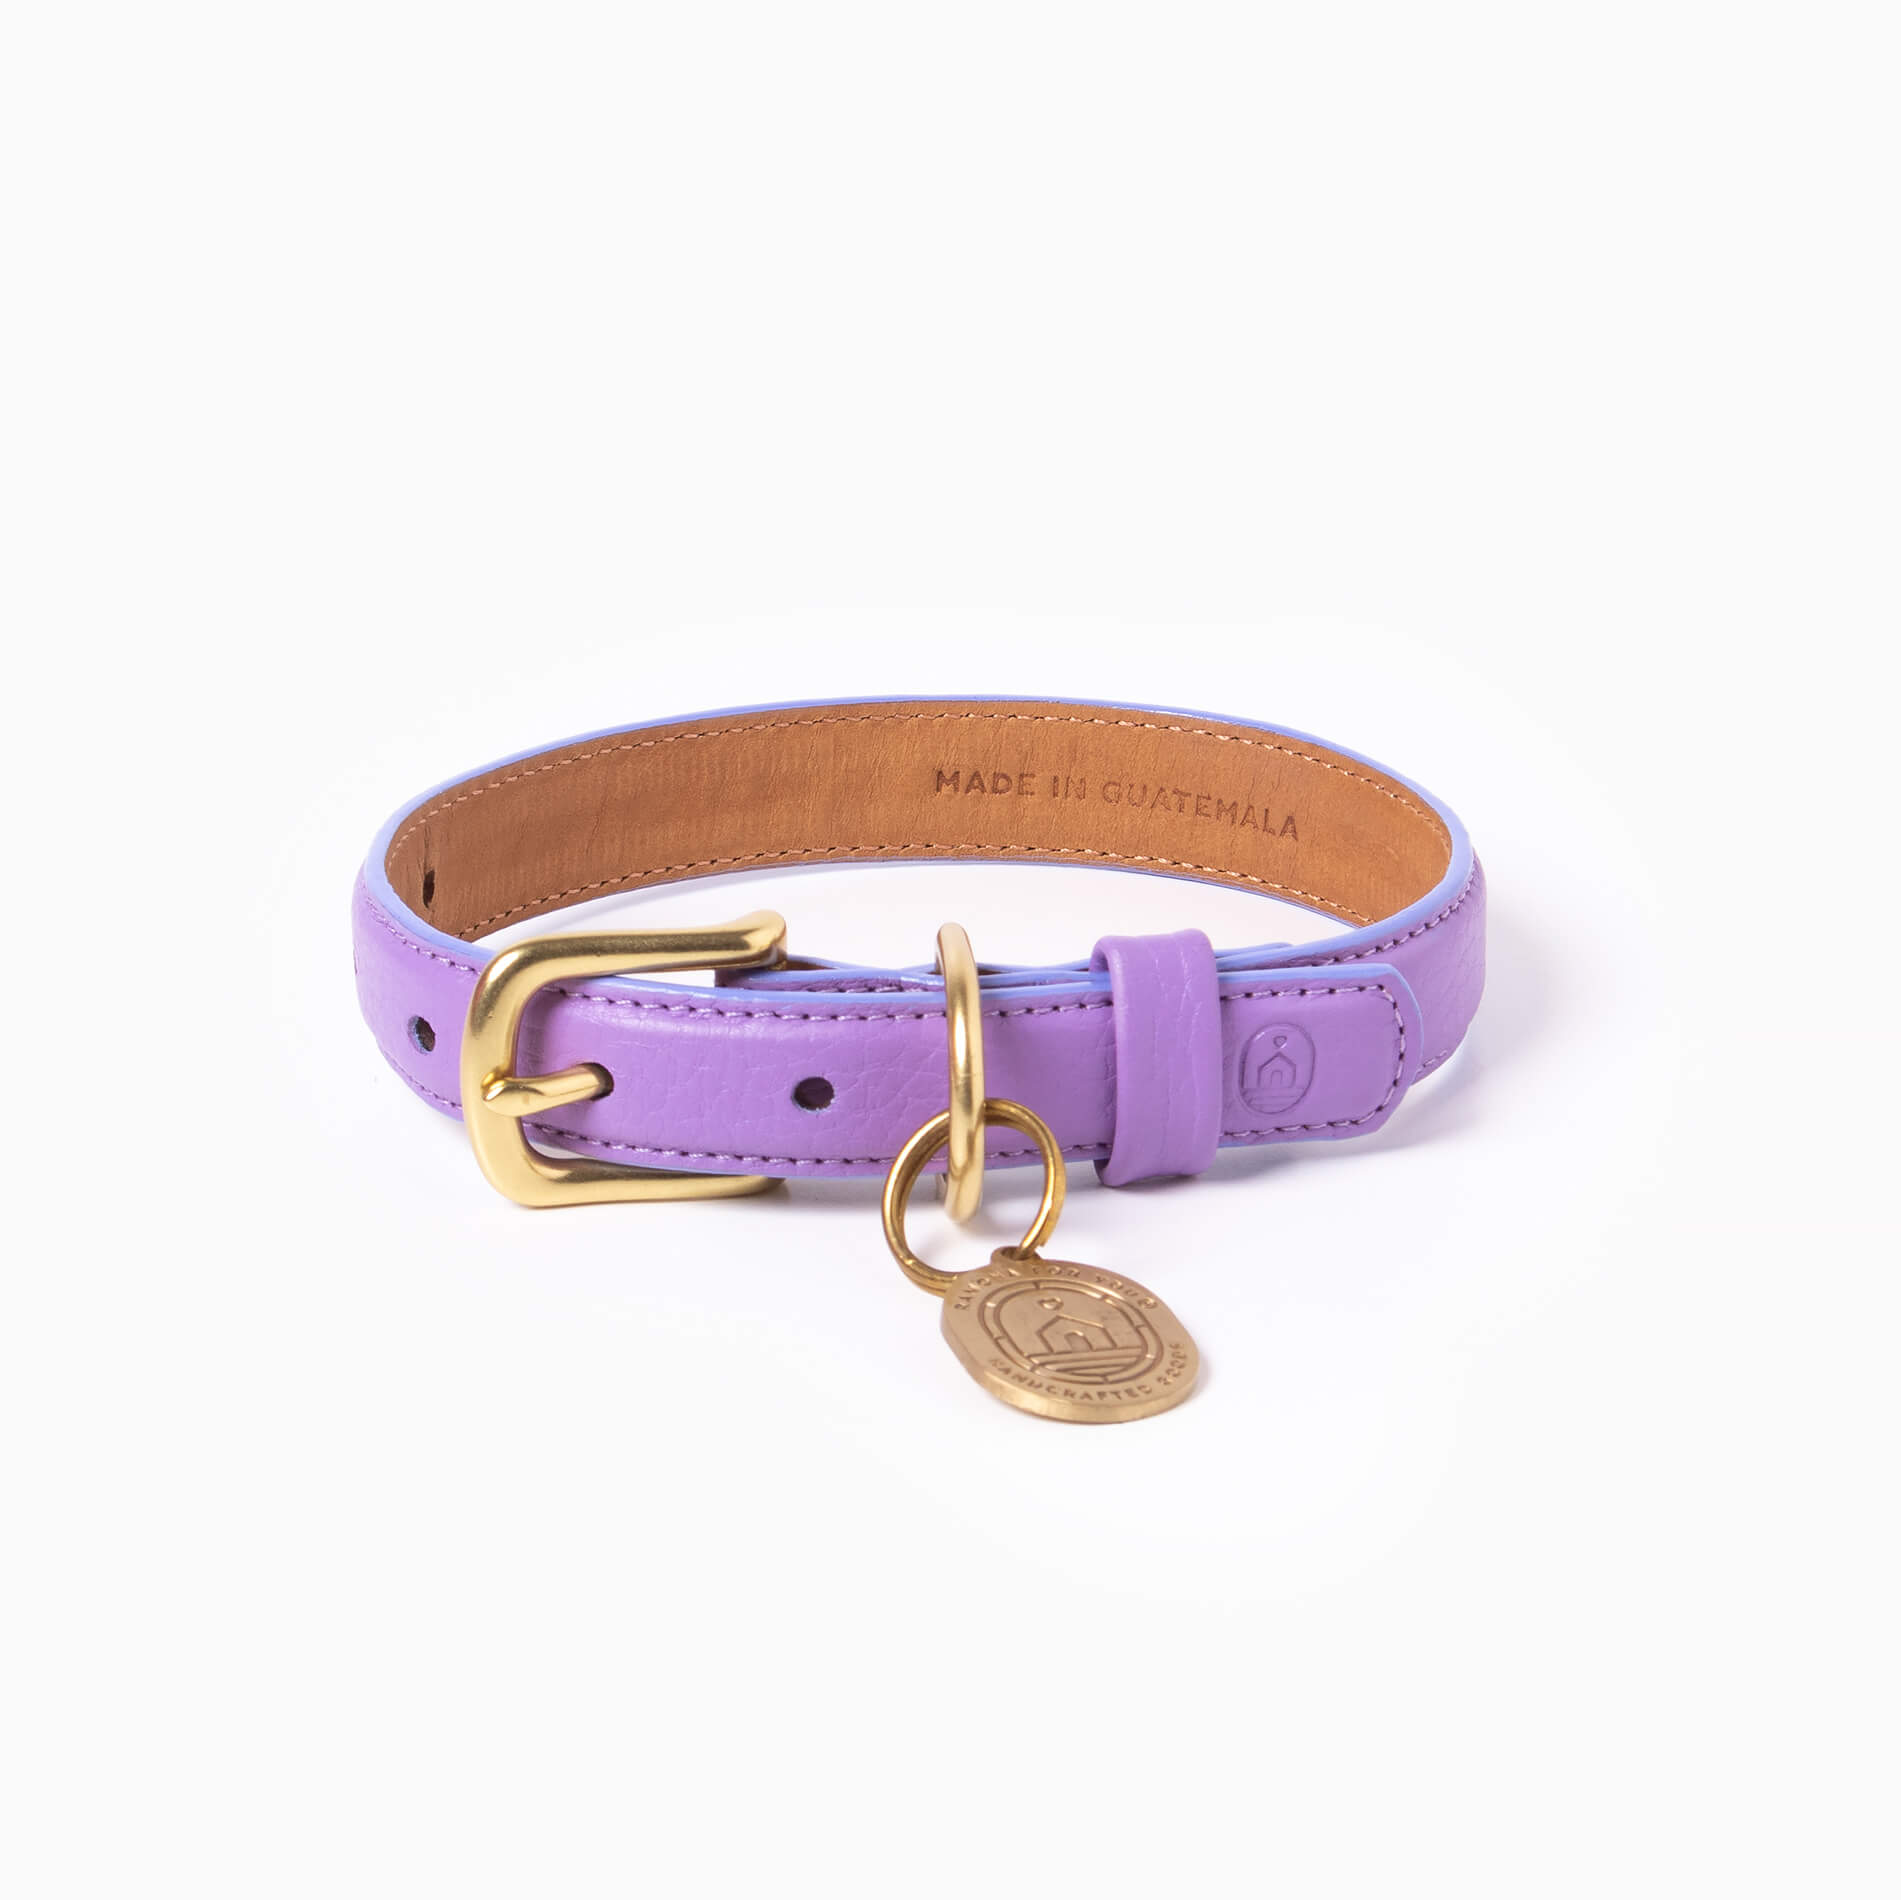 Lilac leather dog collar with with brass hardware and tag ID. Luxury dog collar.